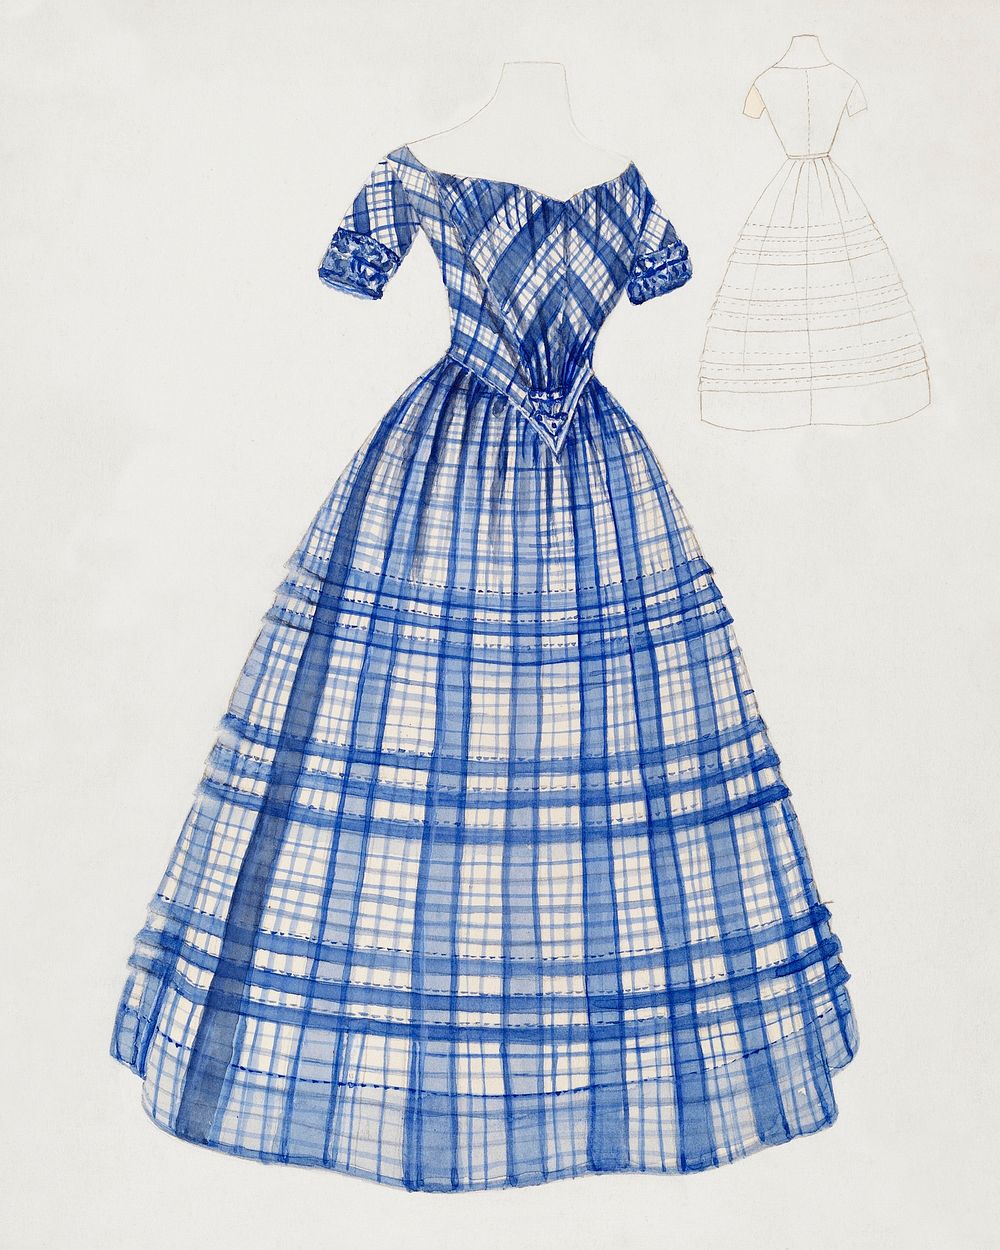 Dress (1935/1942). Original from The National Gallery of Art. Digitally enhanced by rawpixel.